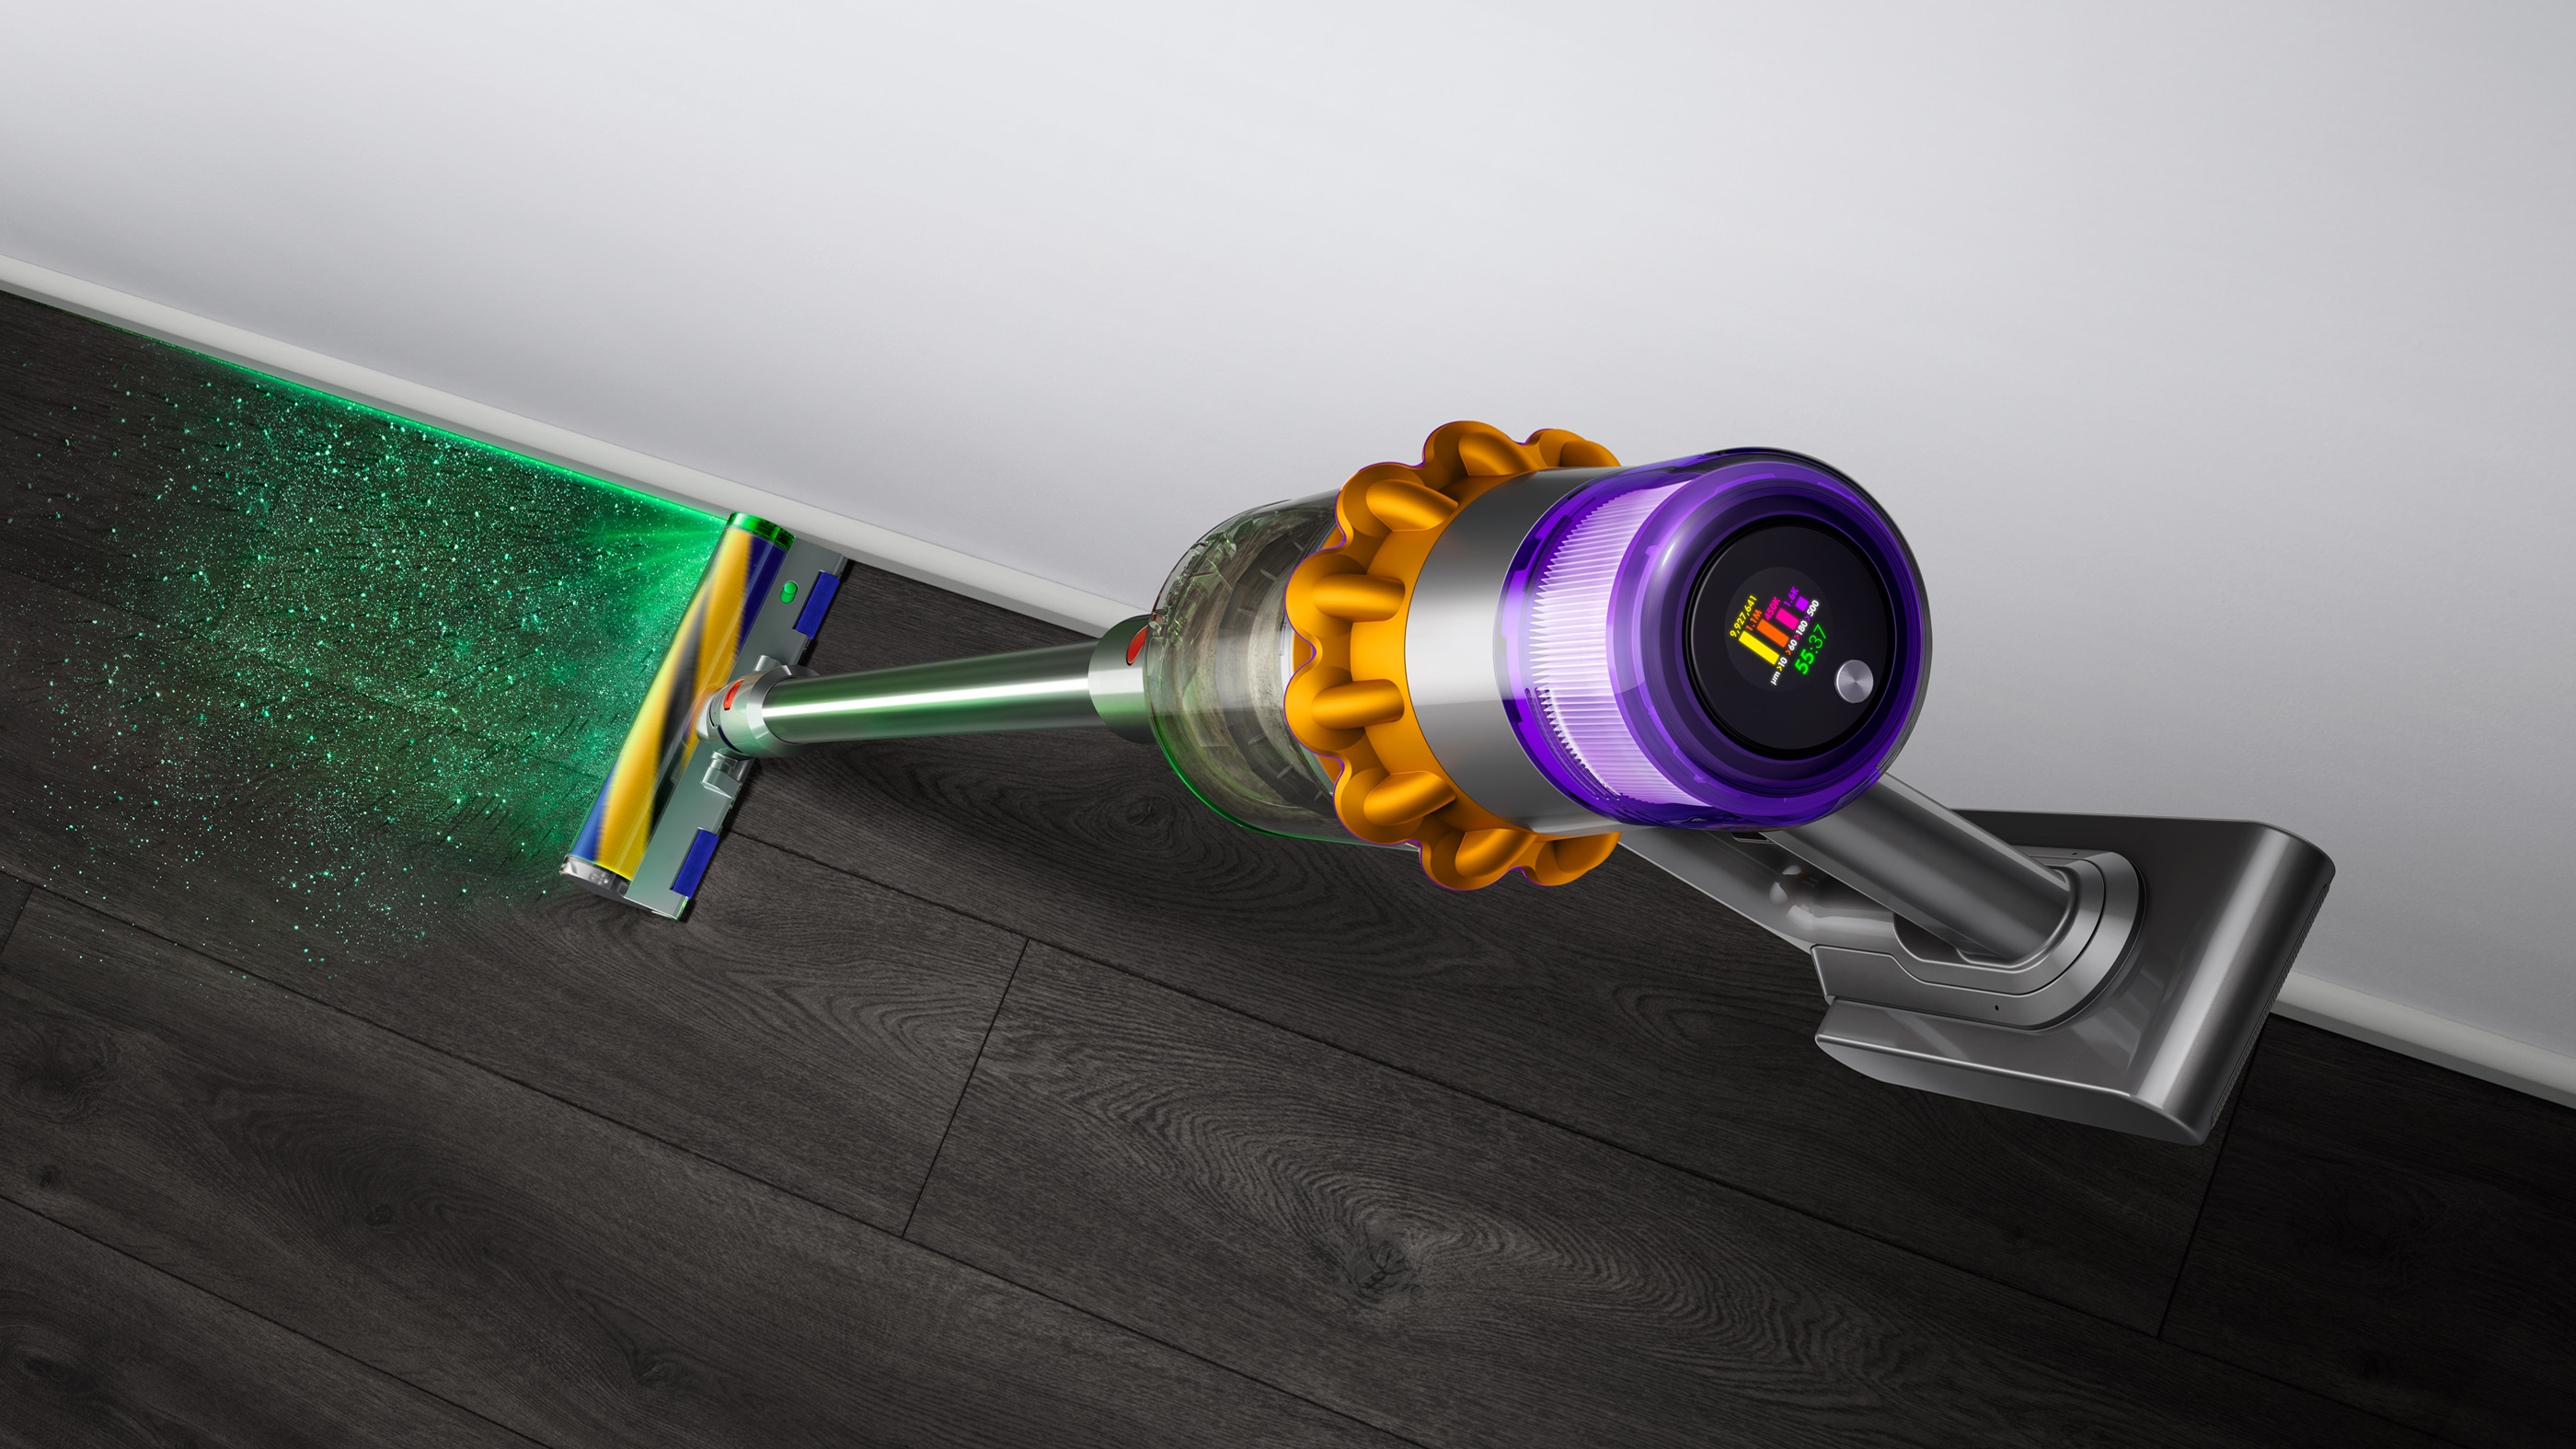 A view from above of the Dyson V15 Detect